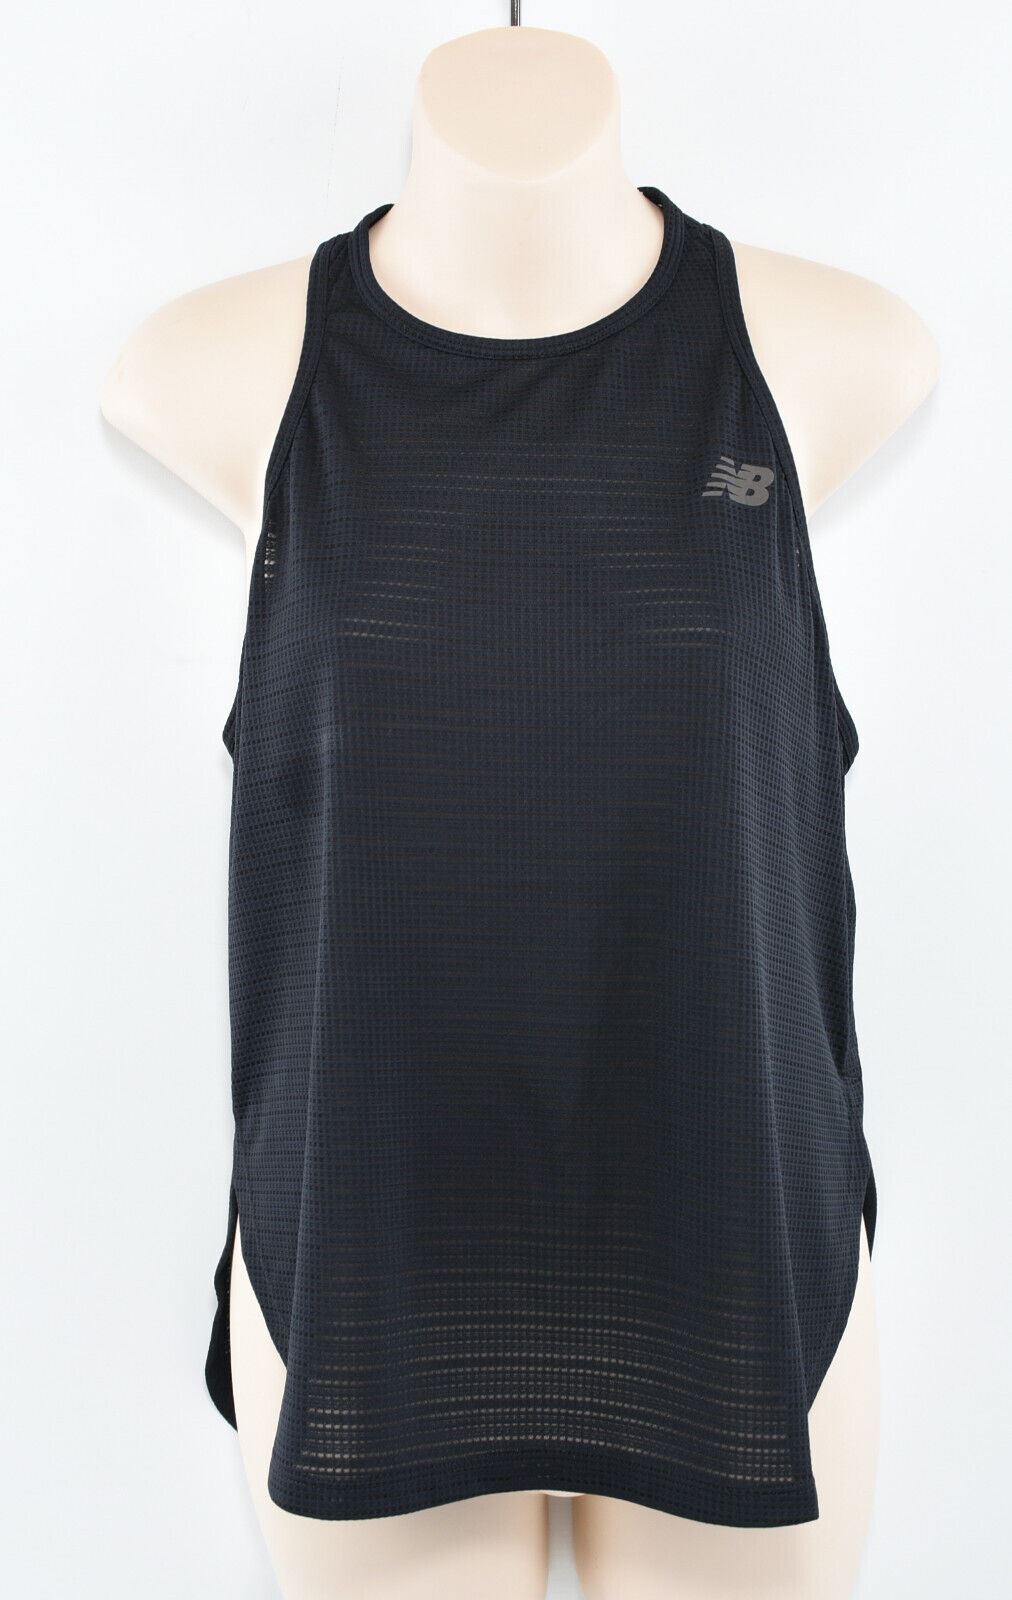 NEW BALANCE Activewear Women's Relaxed Tank Top, Black, size M (UK 12)